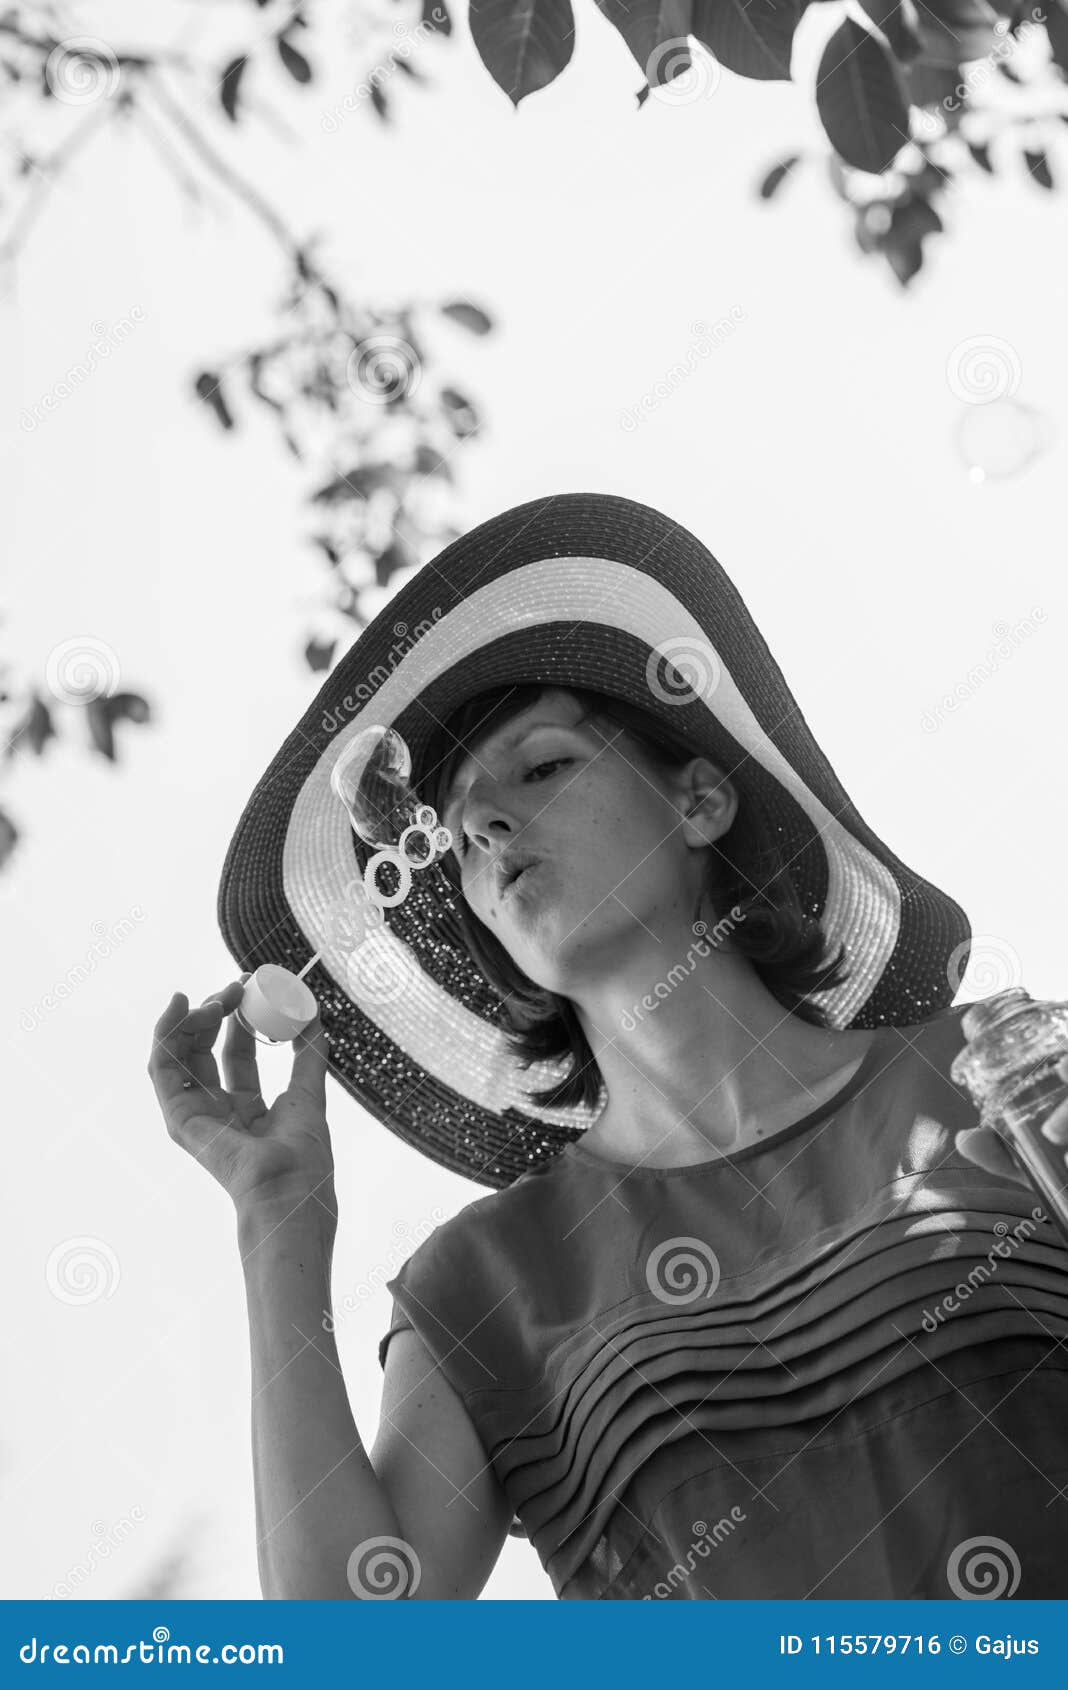 greyscale portrait of an attractive woman in a wide brimmed sunhat blowing bubbles